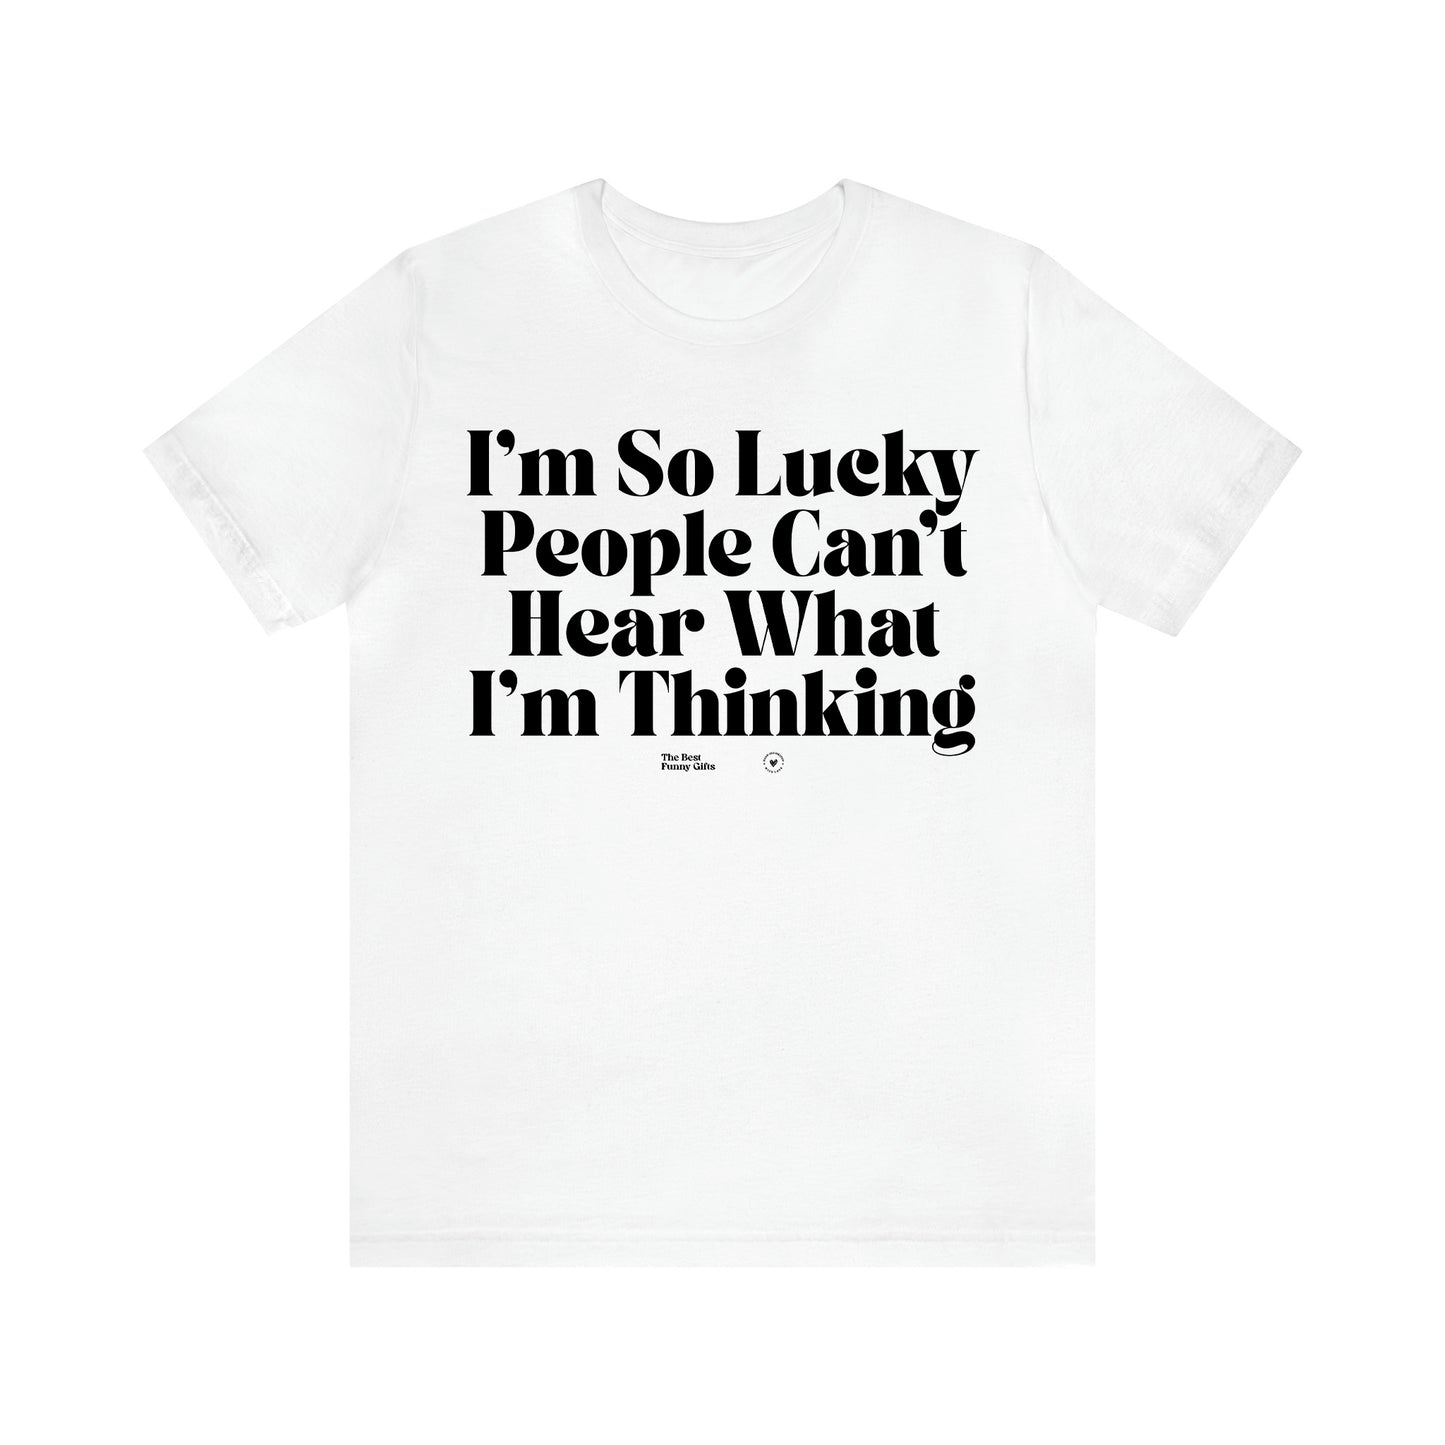 Women's T Shirts I'm So Lucky People Can't Hear What I'm Thinking - The Best Funny Gifts